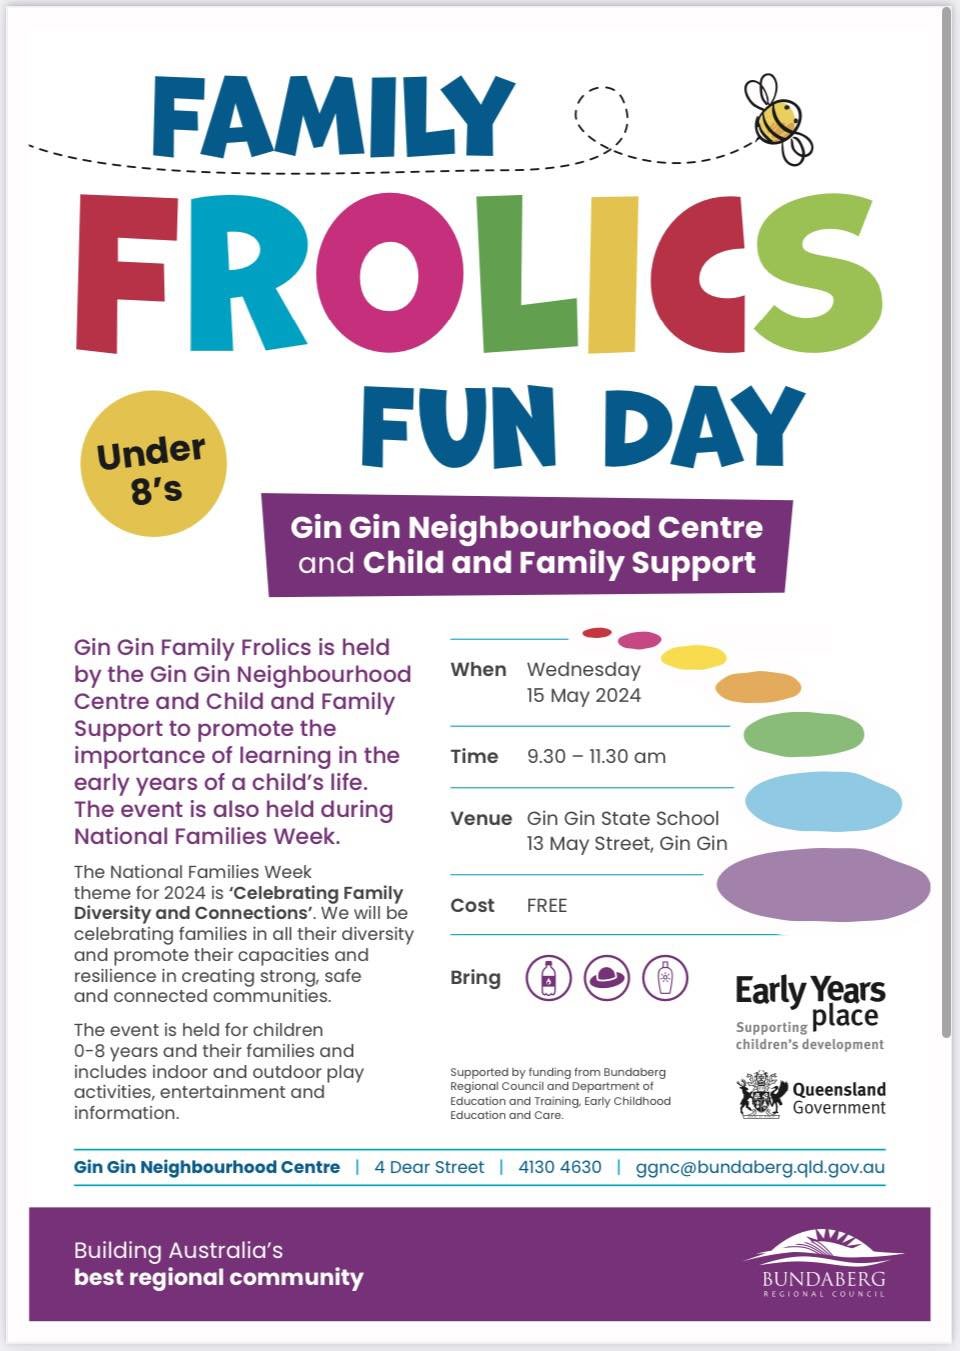 One day to go!

Family Frolics Fun Day is a FREE Community event.  Wild Gully is super excited to showcase our nature play with the local children.

Join us at Gin Gin State School to celebrate all things play and Under 8's Day.

Wednesday 15 May

9.